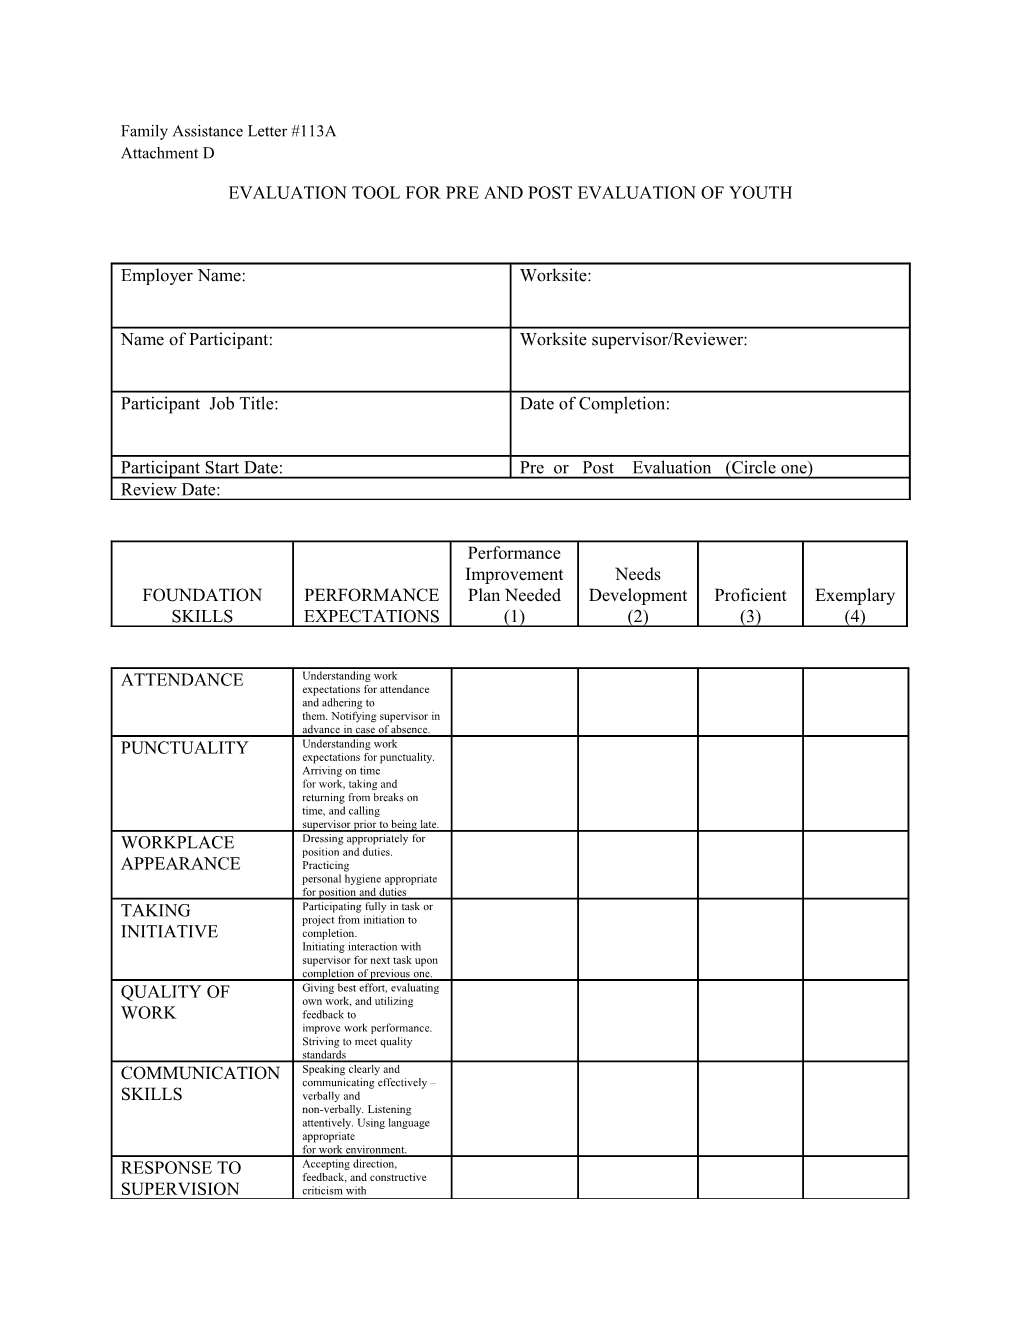 Evaluation Tool for Pre and Post Evaluation of Youth